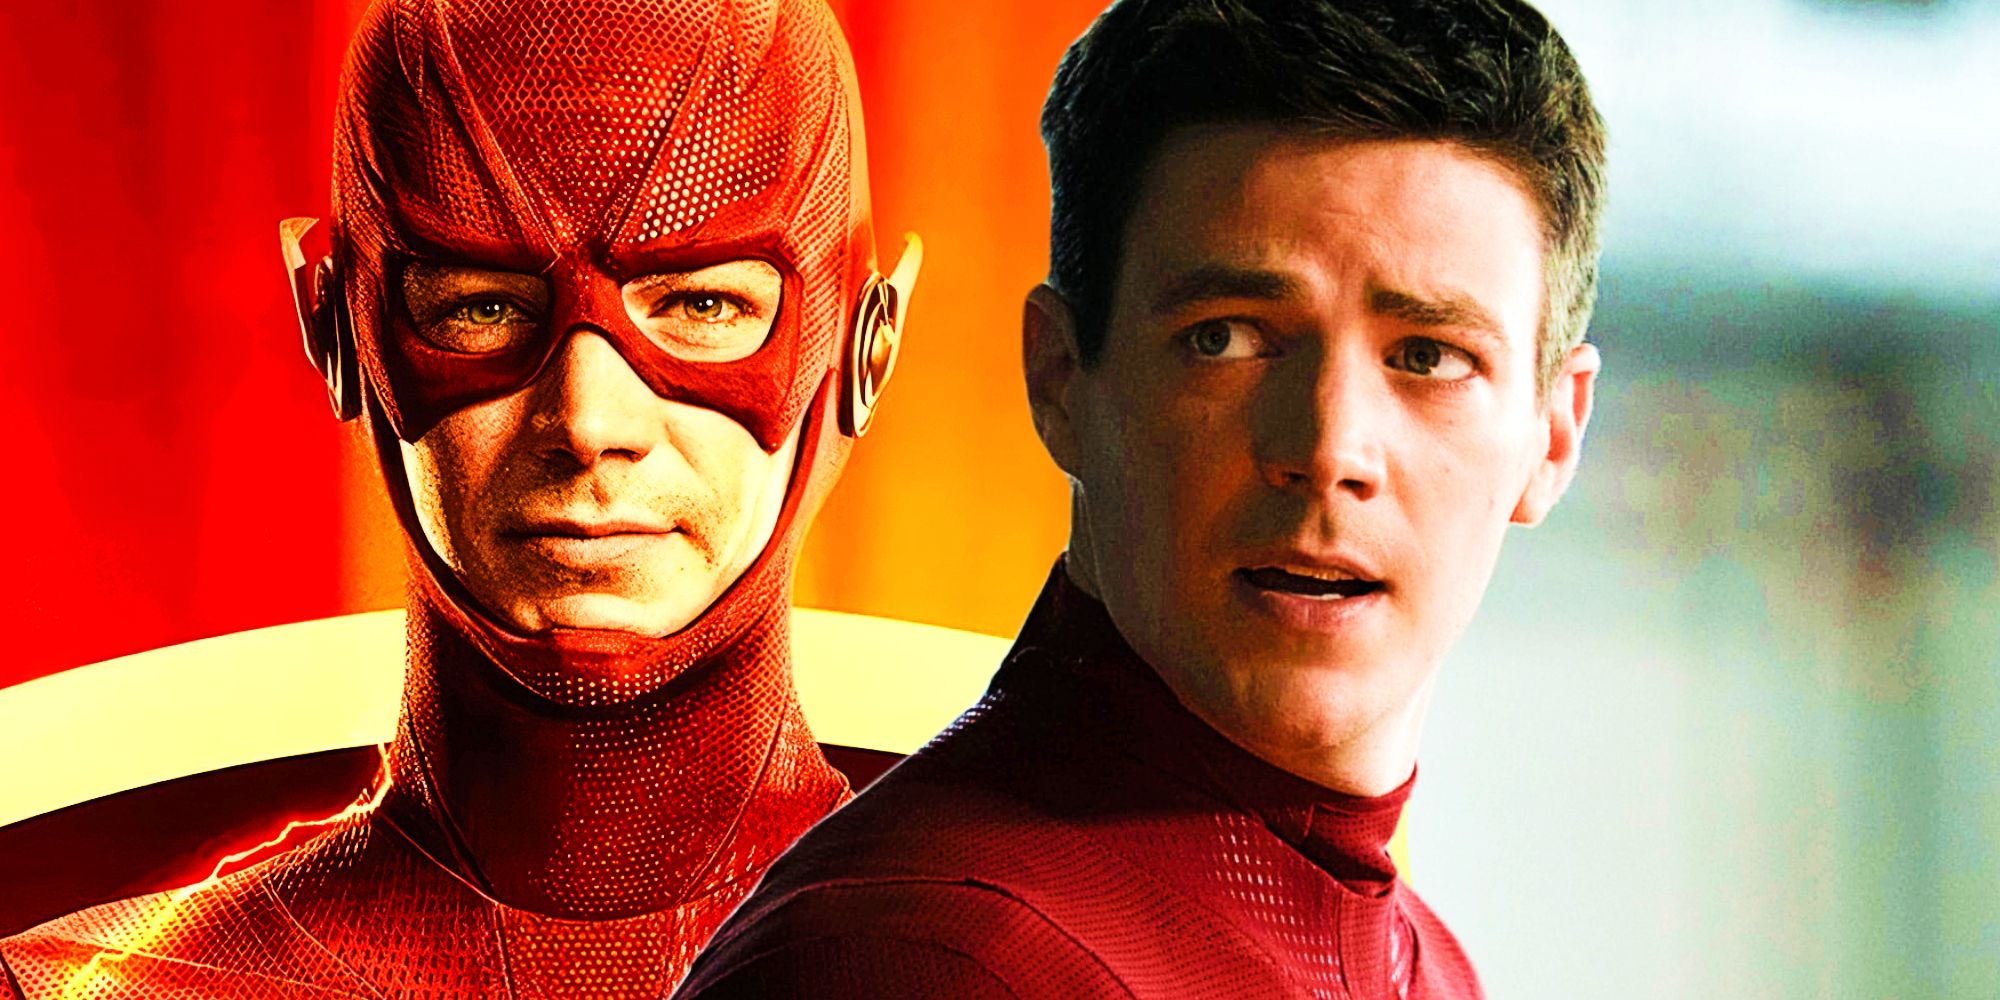 The Flash season 9 poster and Grant Gustin as Barry Allen